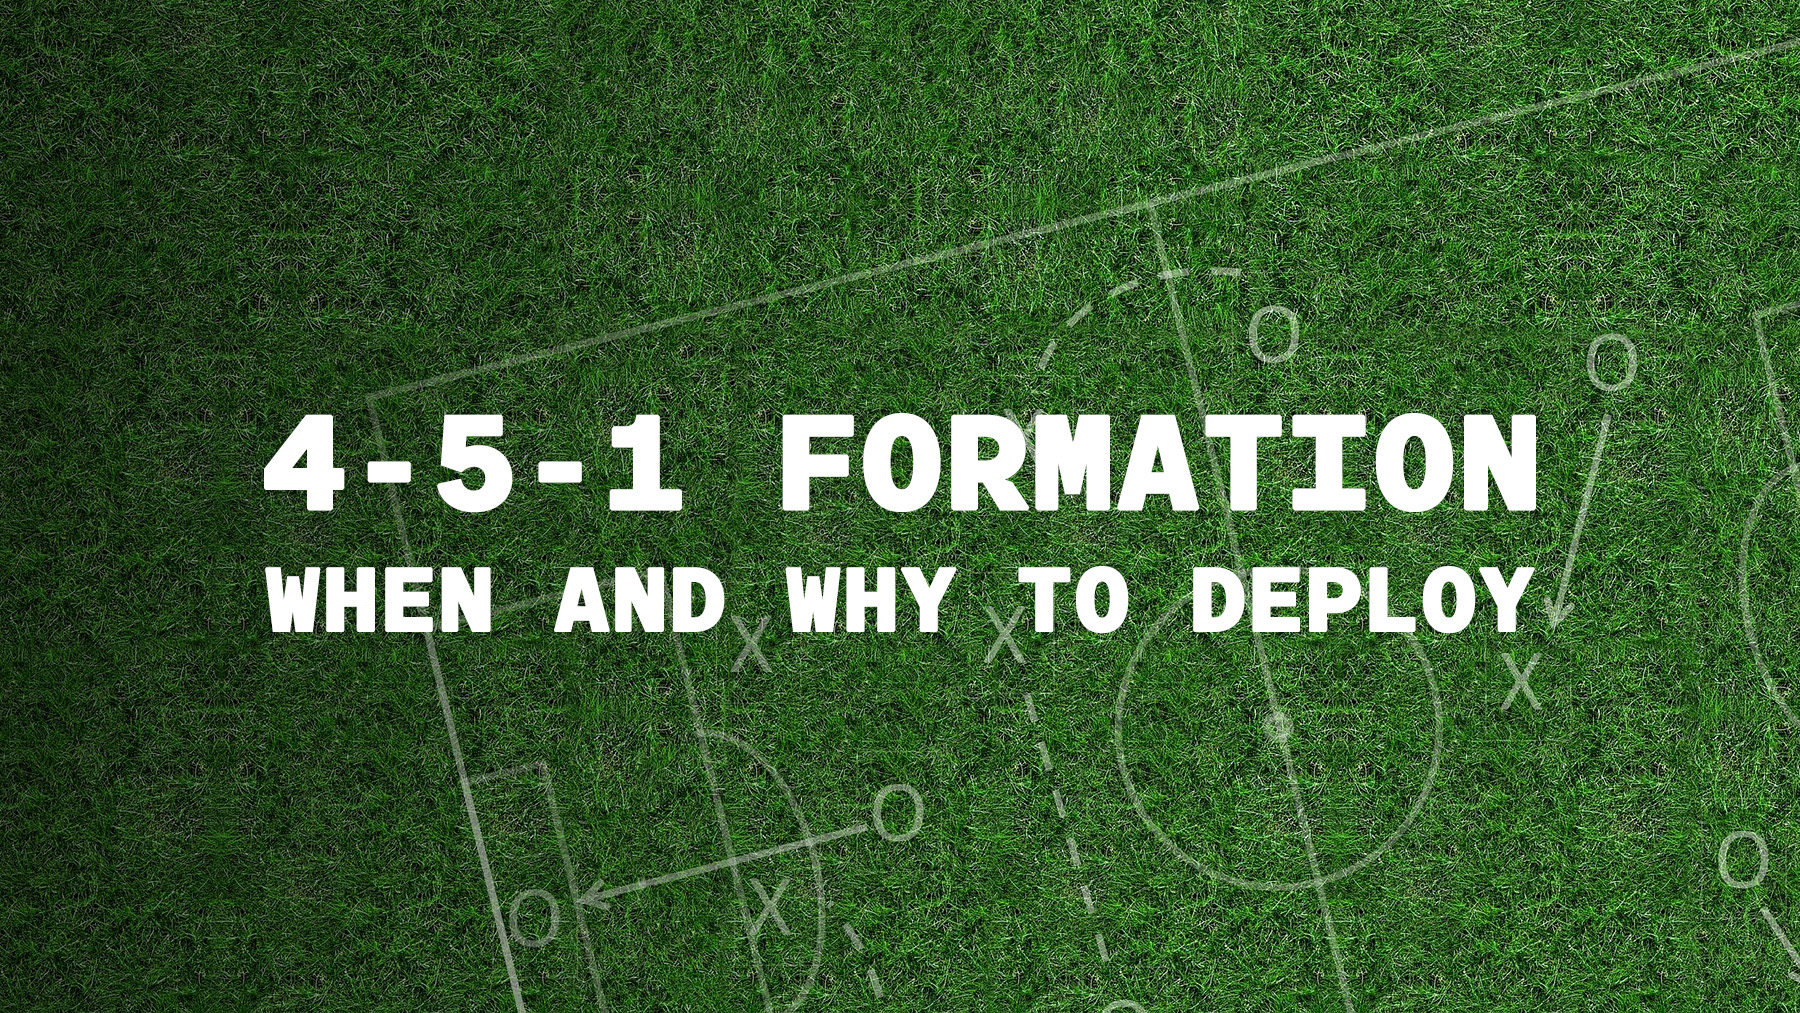 Knowing When and Why to Use the 4-5-1 Formation